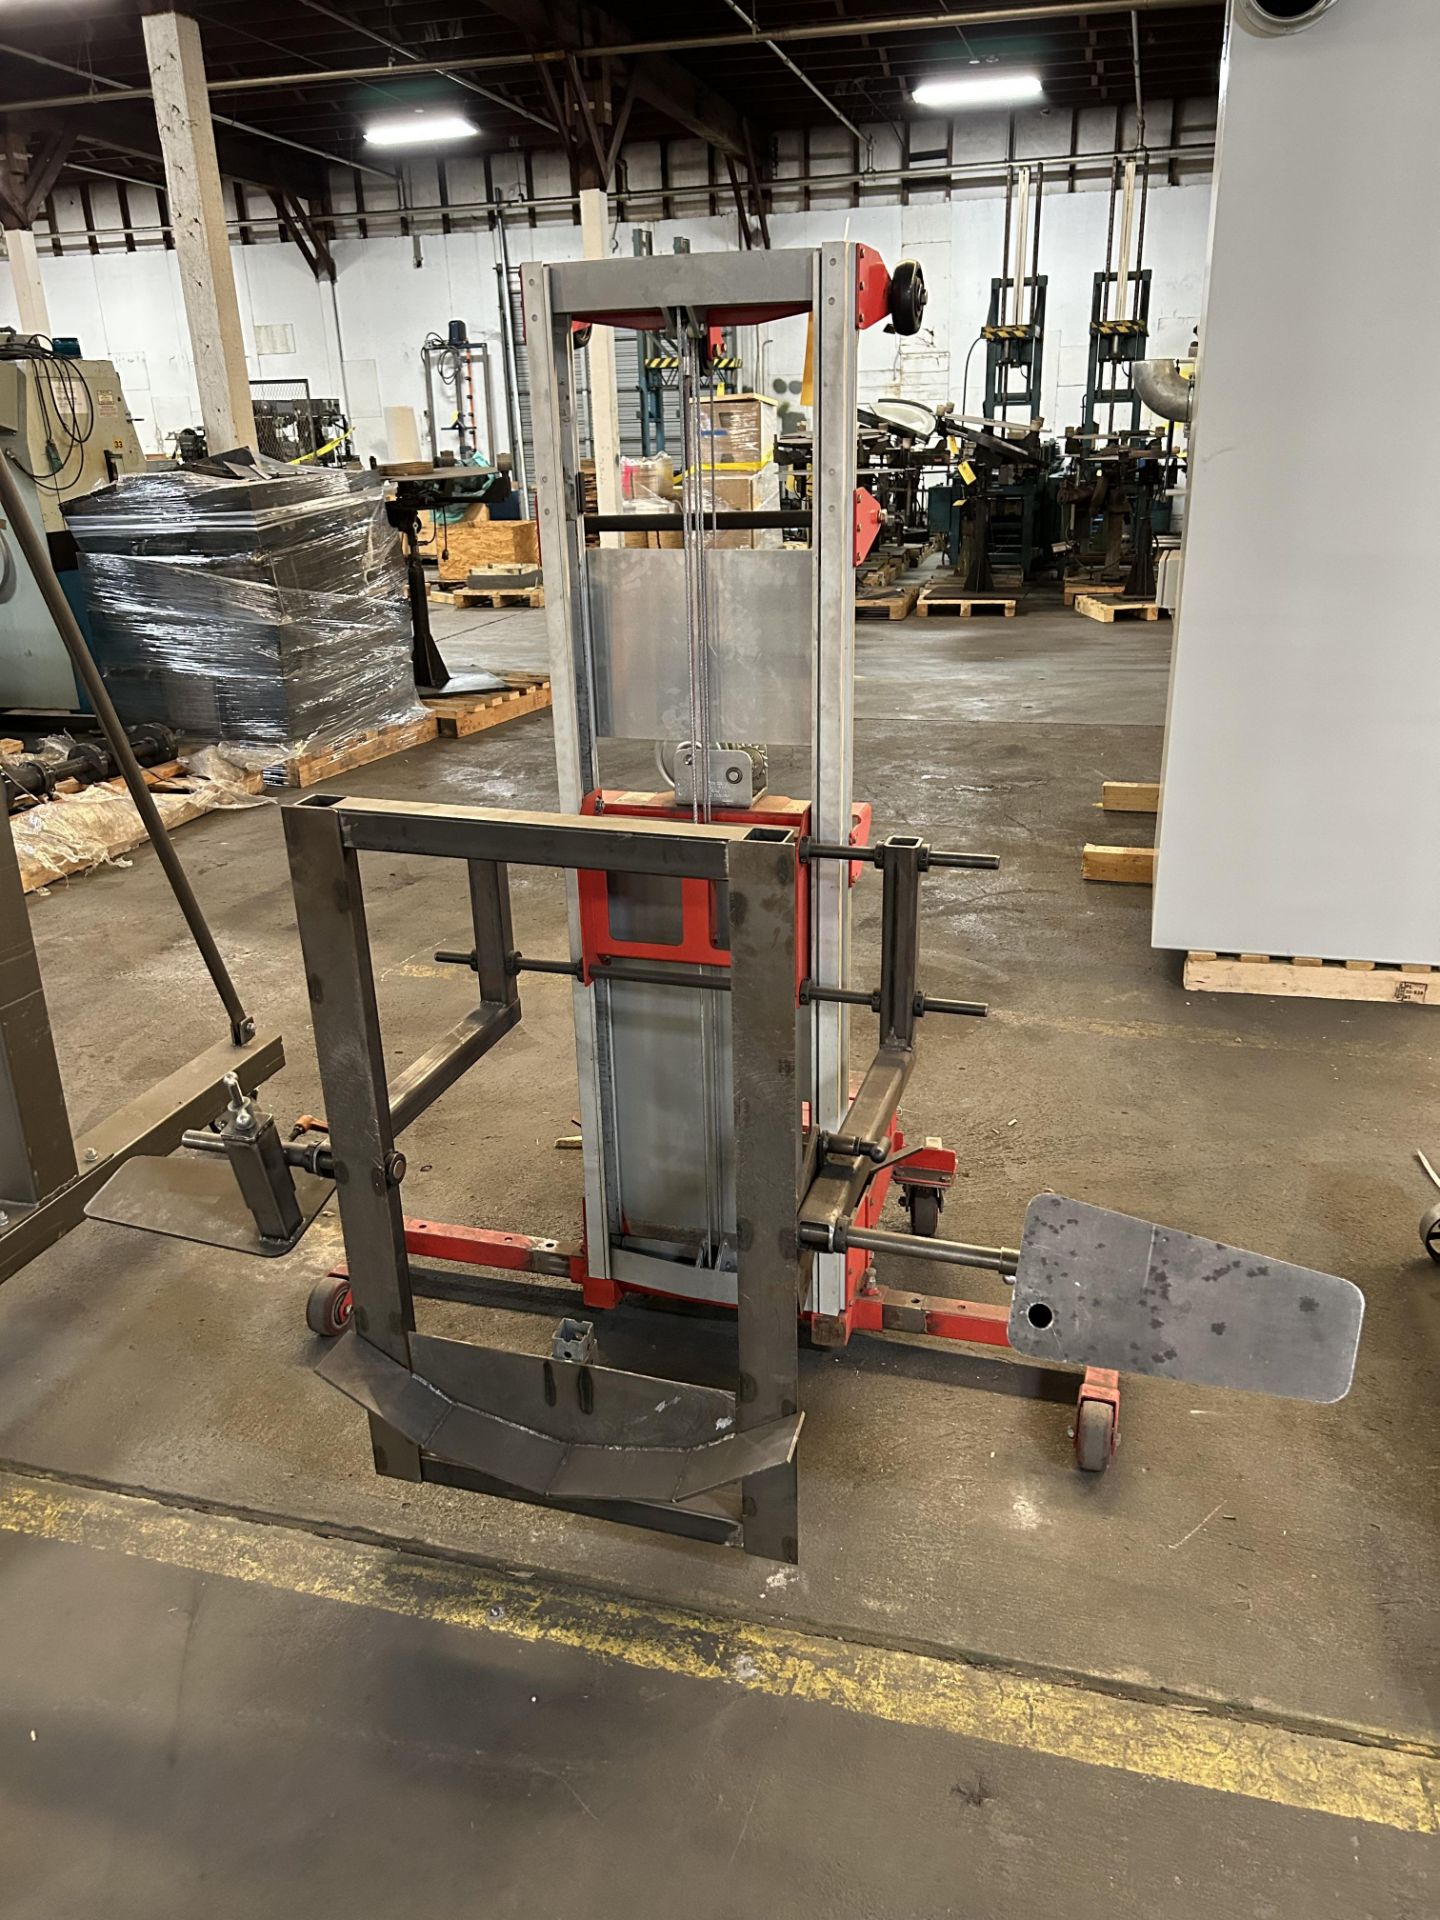 Dutton-Lainson Utility Lift, Max Load Capacity 400 Lbs, Rigging/Loading Fee: $50 - Image 2 of 5